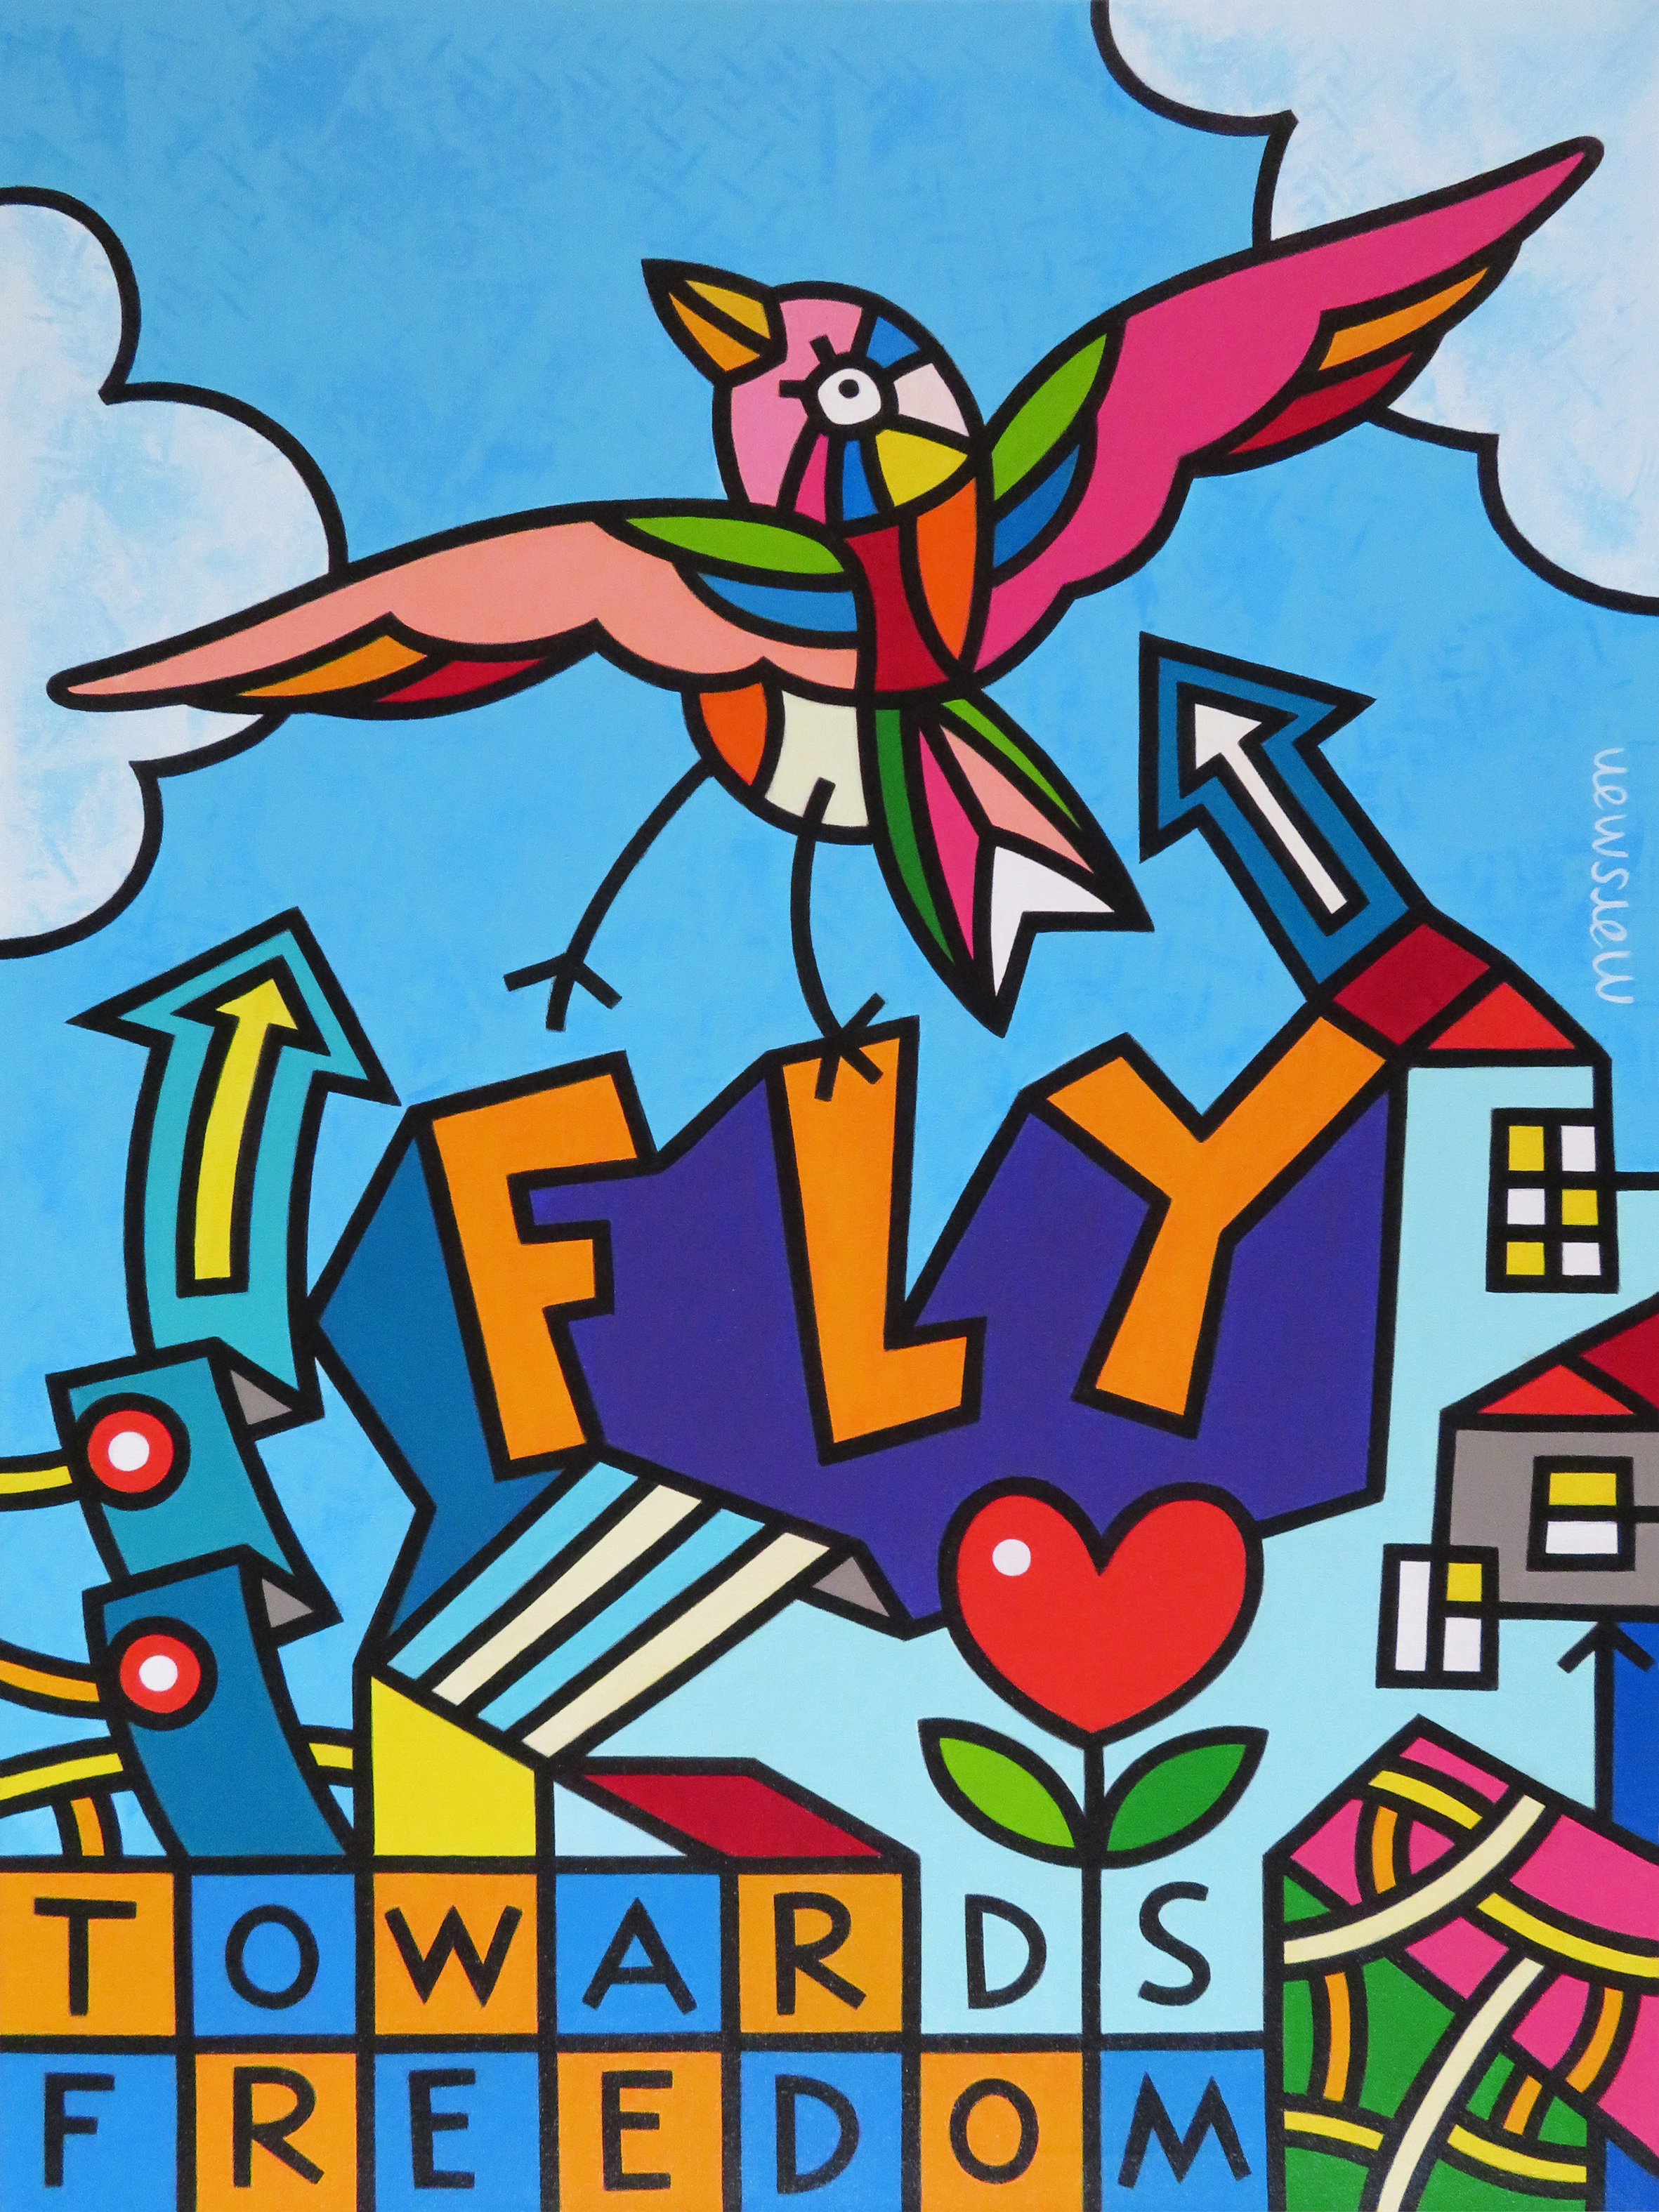 <b>FLY TOWARDS FREEDOM (2)</b> - 60 x 80 x 3 cm - acrylic on canvas - SOLD  <a style="color: red; text-decoration: none" href="mailto:jpgpmarsman@onsbrabantnet.nl">BESTEL</a>